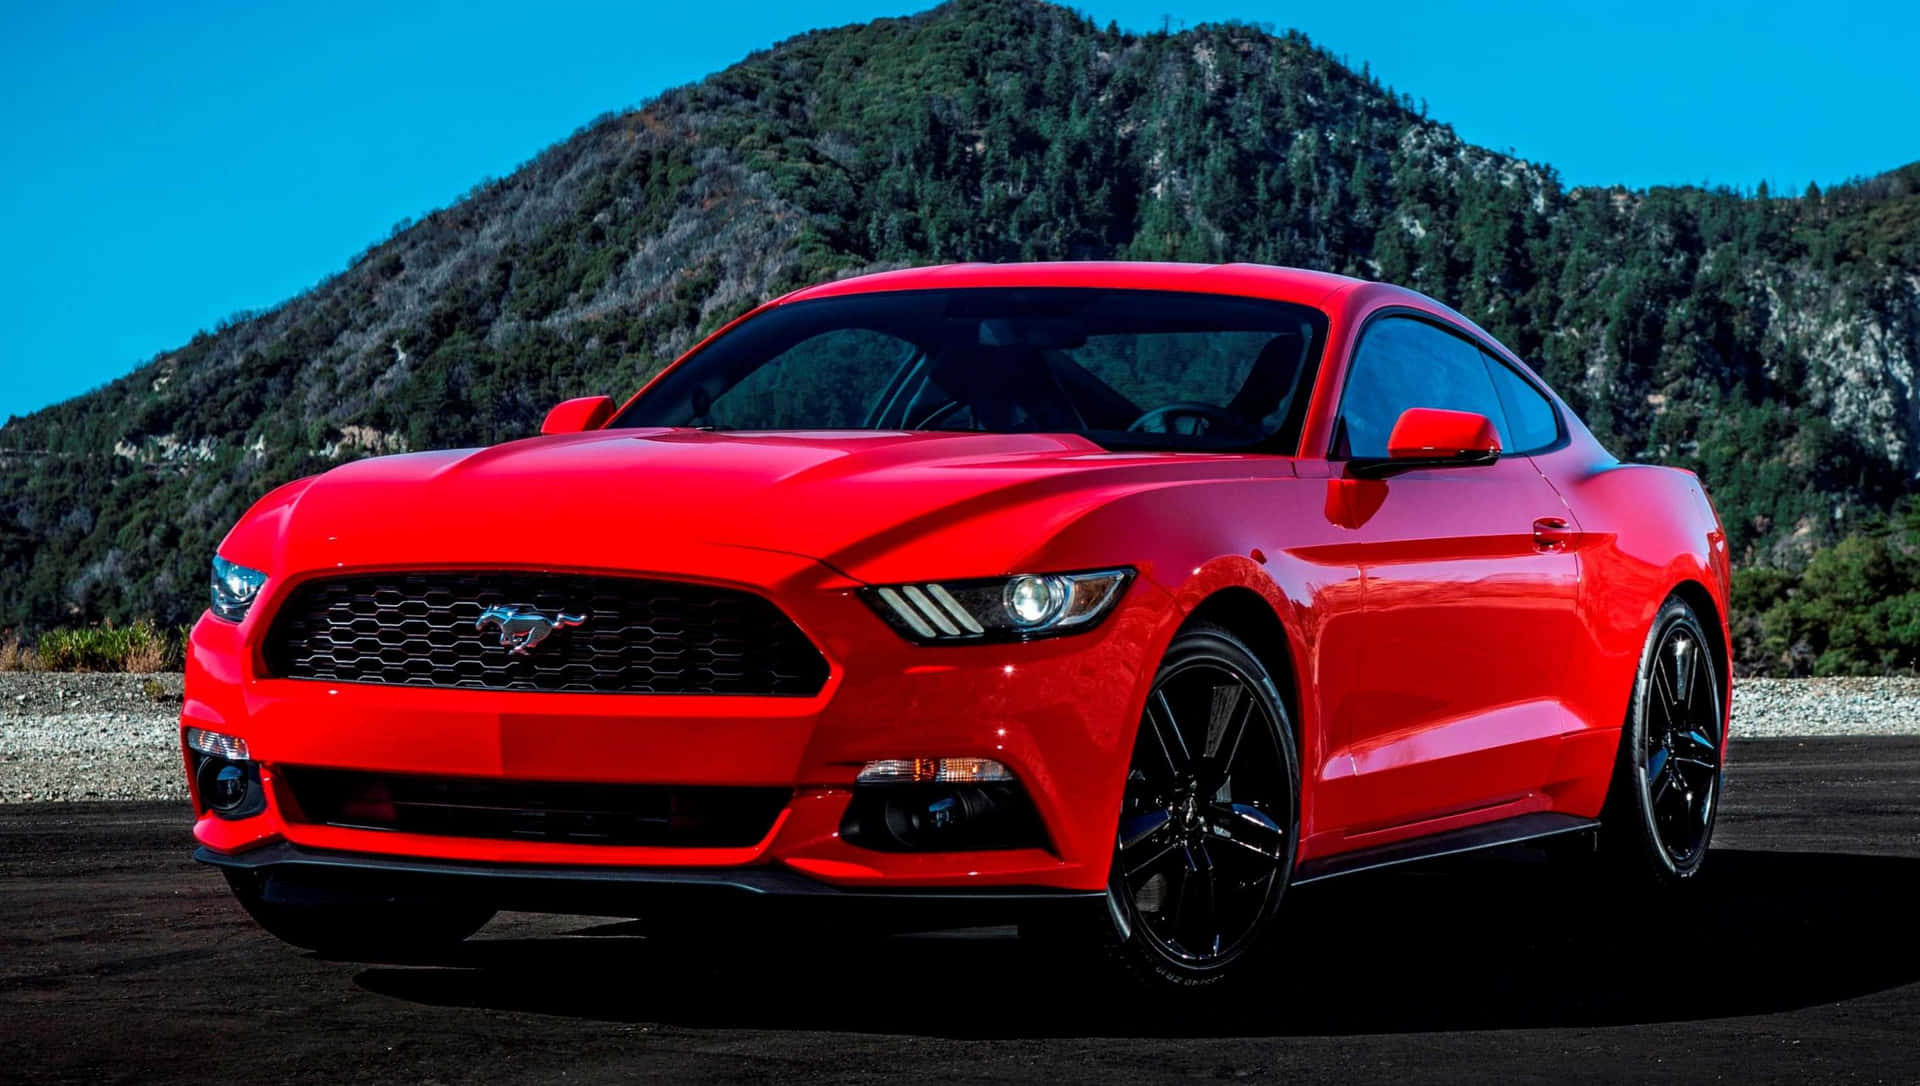 The Red Ford Mustang Is Parked In Front Of Mountains